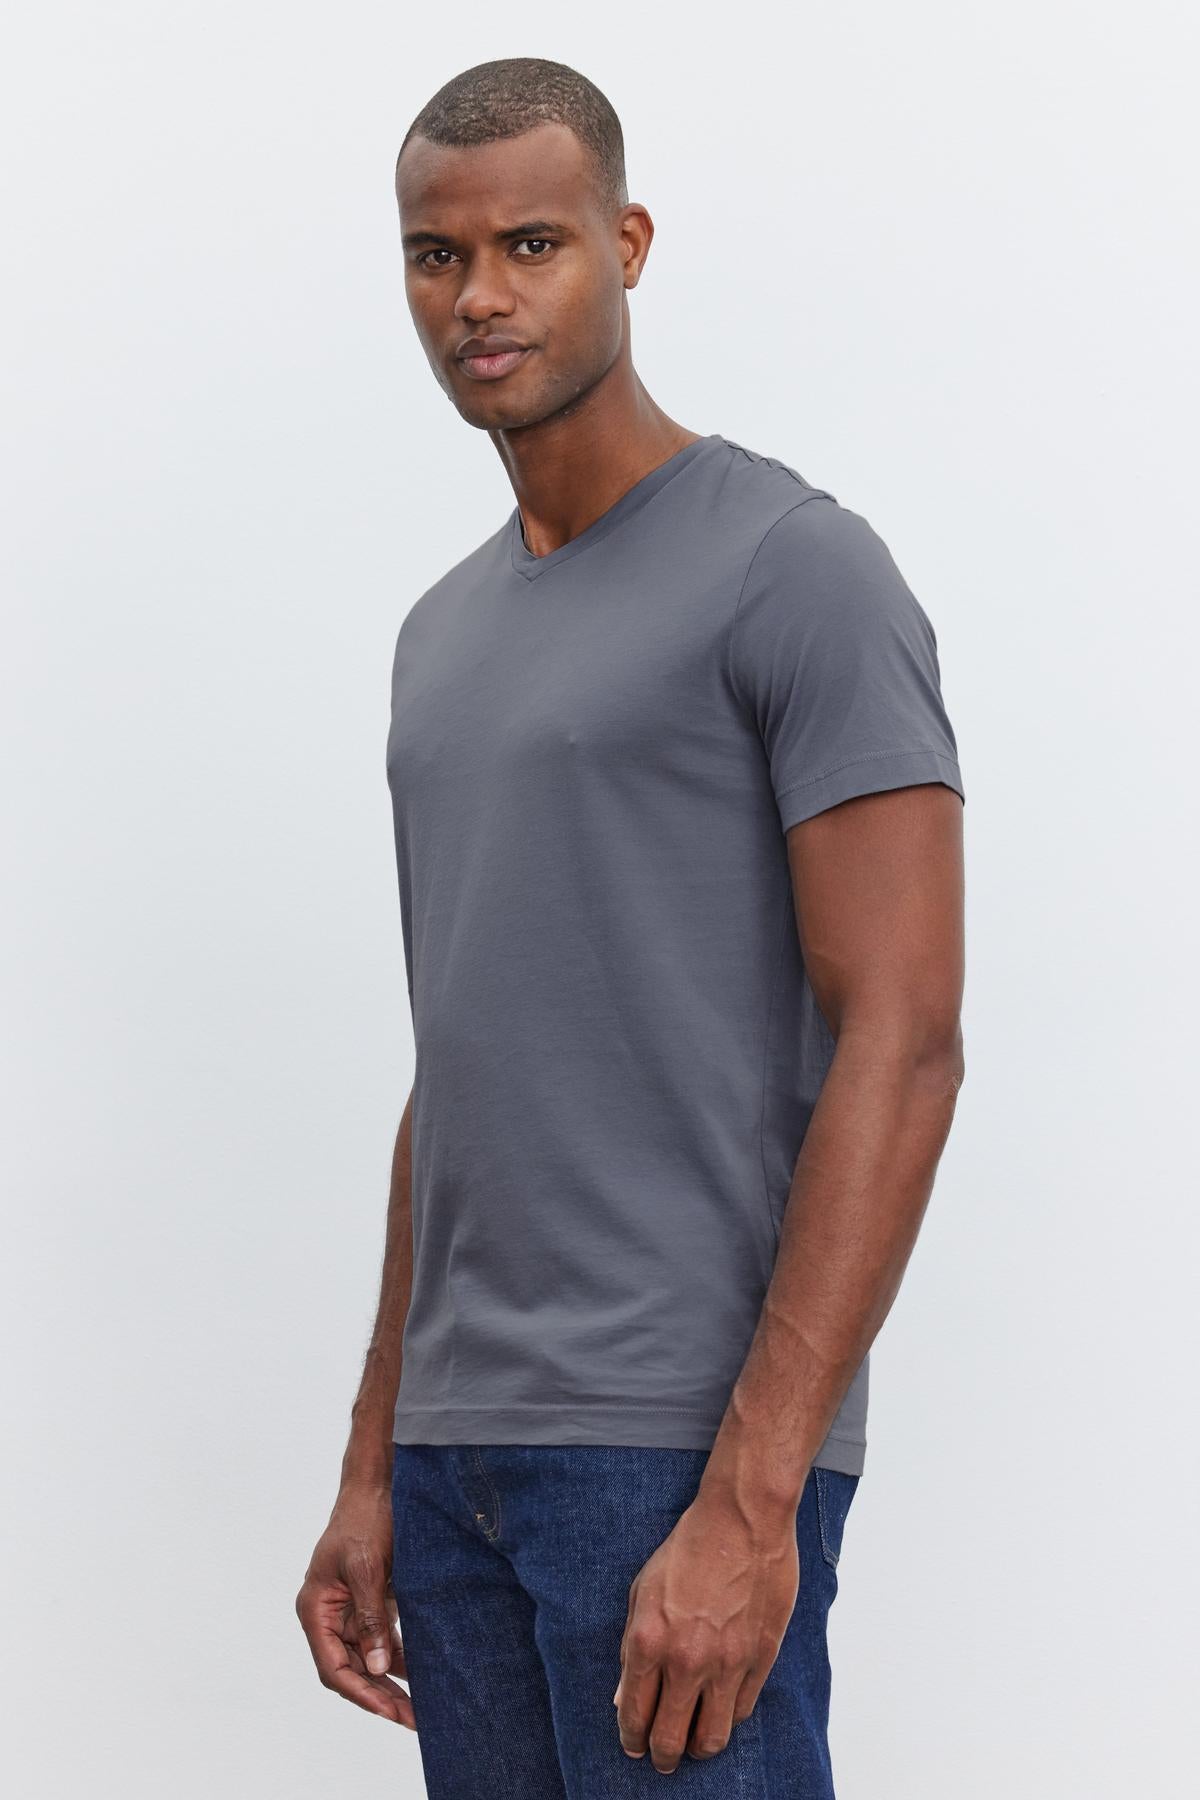 A man wearing a grey V-neckline SAMSEN TEE by Velvet by Graham & Spencer and blue jeans, made of whisper cotton knit for everyday wear, stands against a plain white background, looking at the camera with a neutral expression.-37386135273665